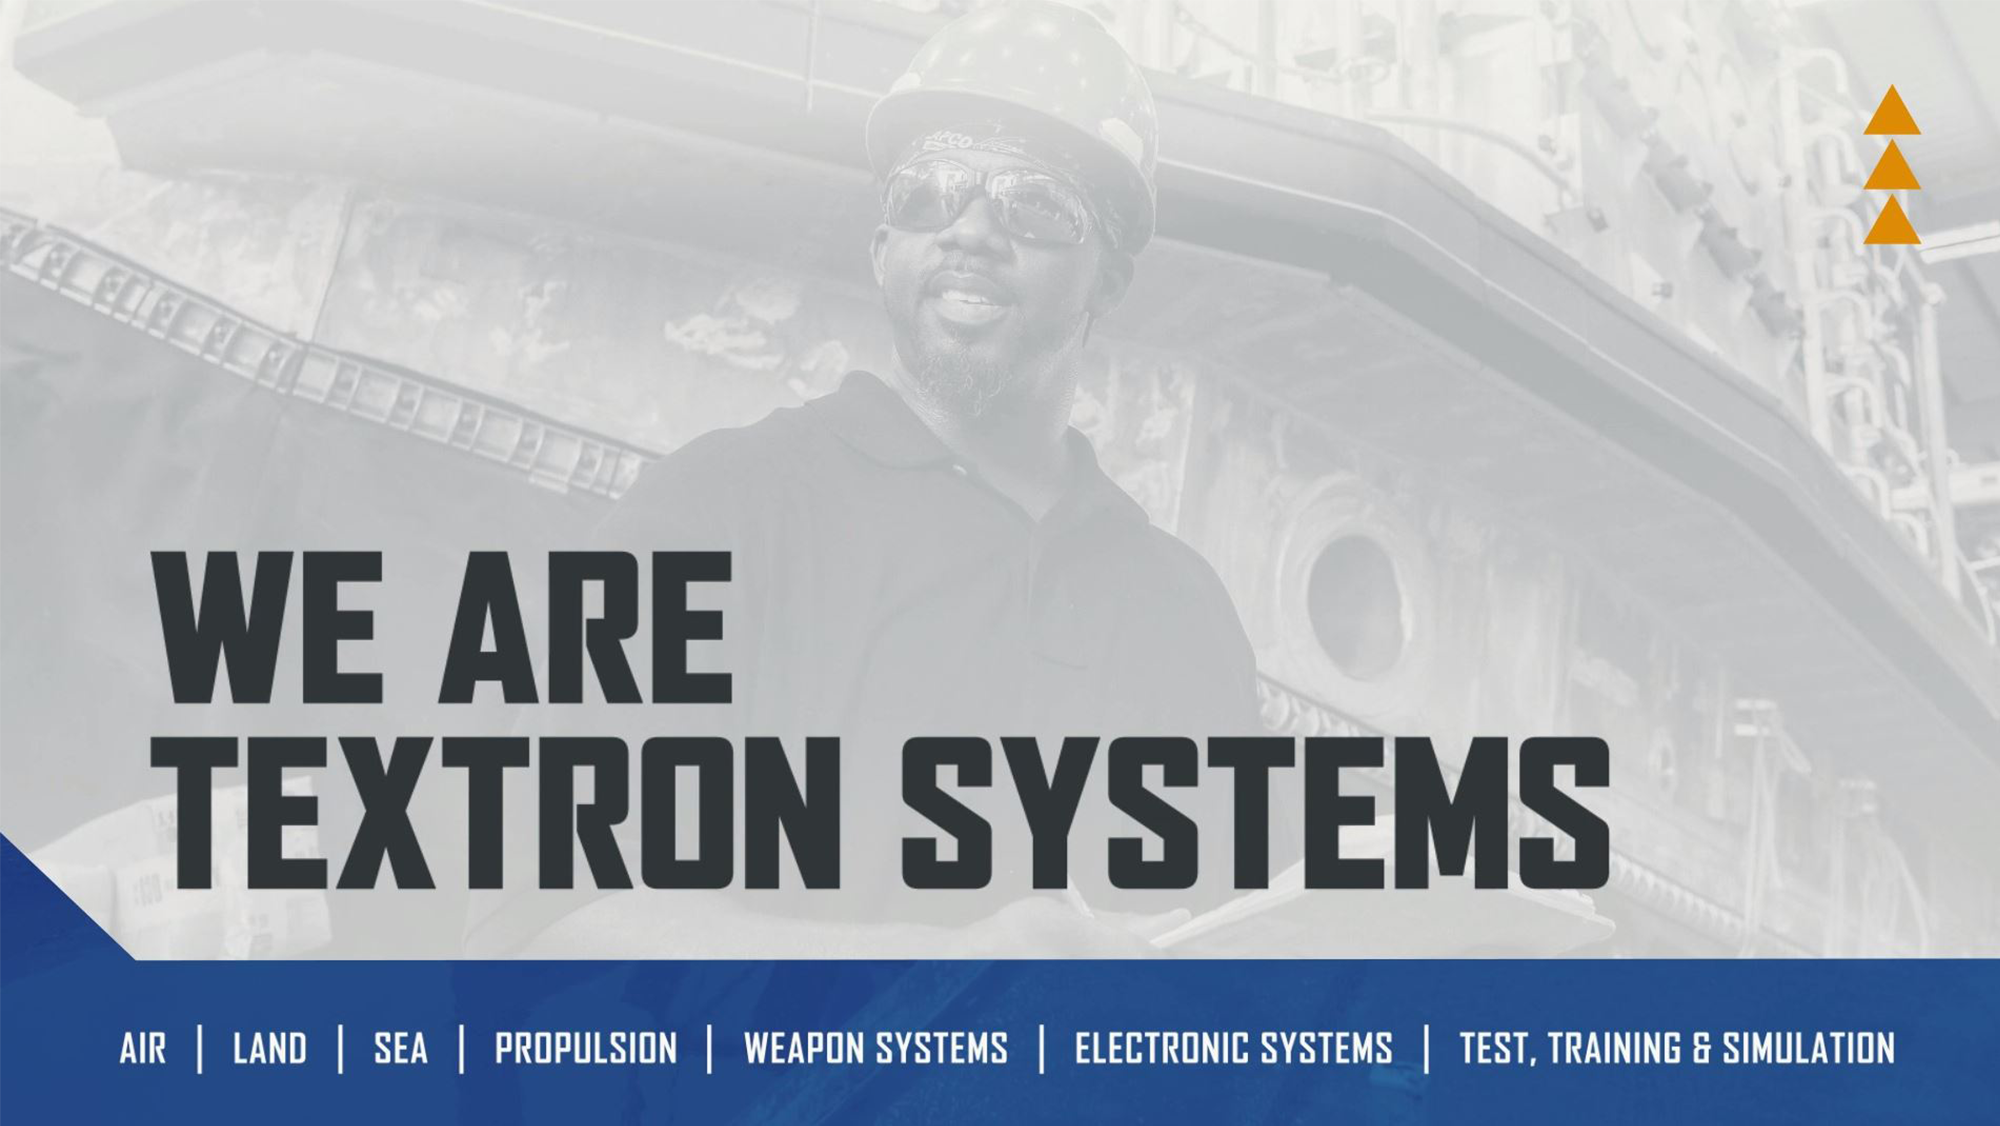 We Are Textron Systems: Air, Land, Sea, Propulsion, Weapon Systems, Electronic Systems, Test, Training and Simulation